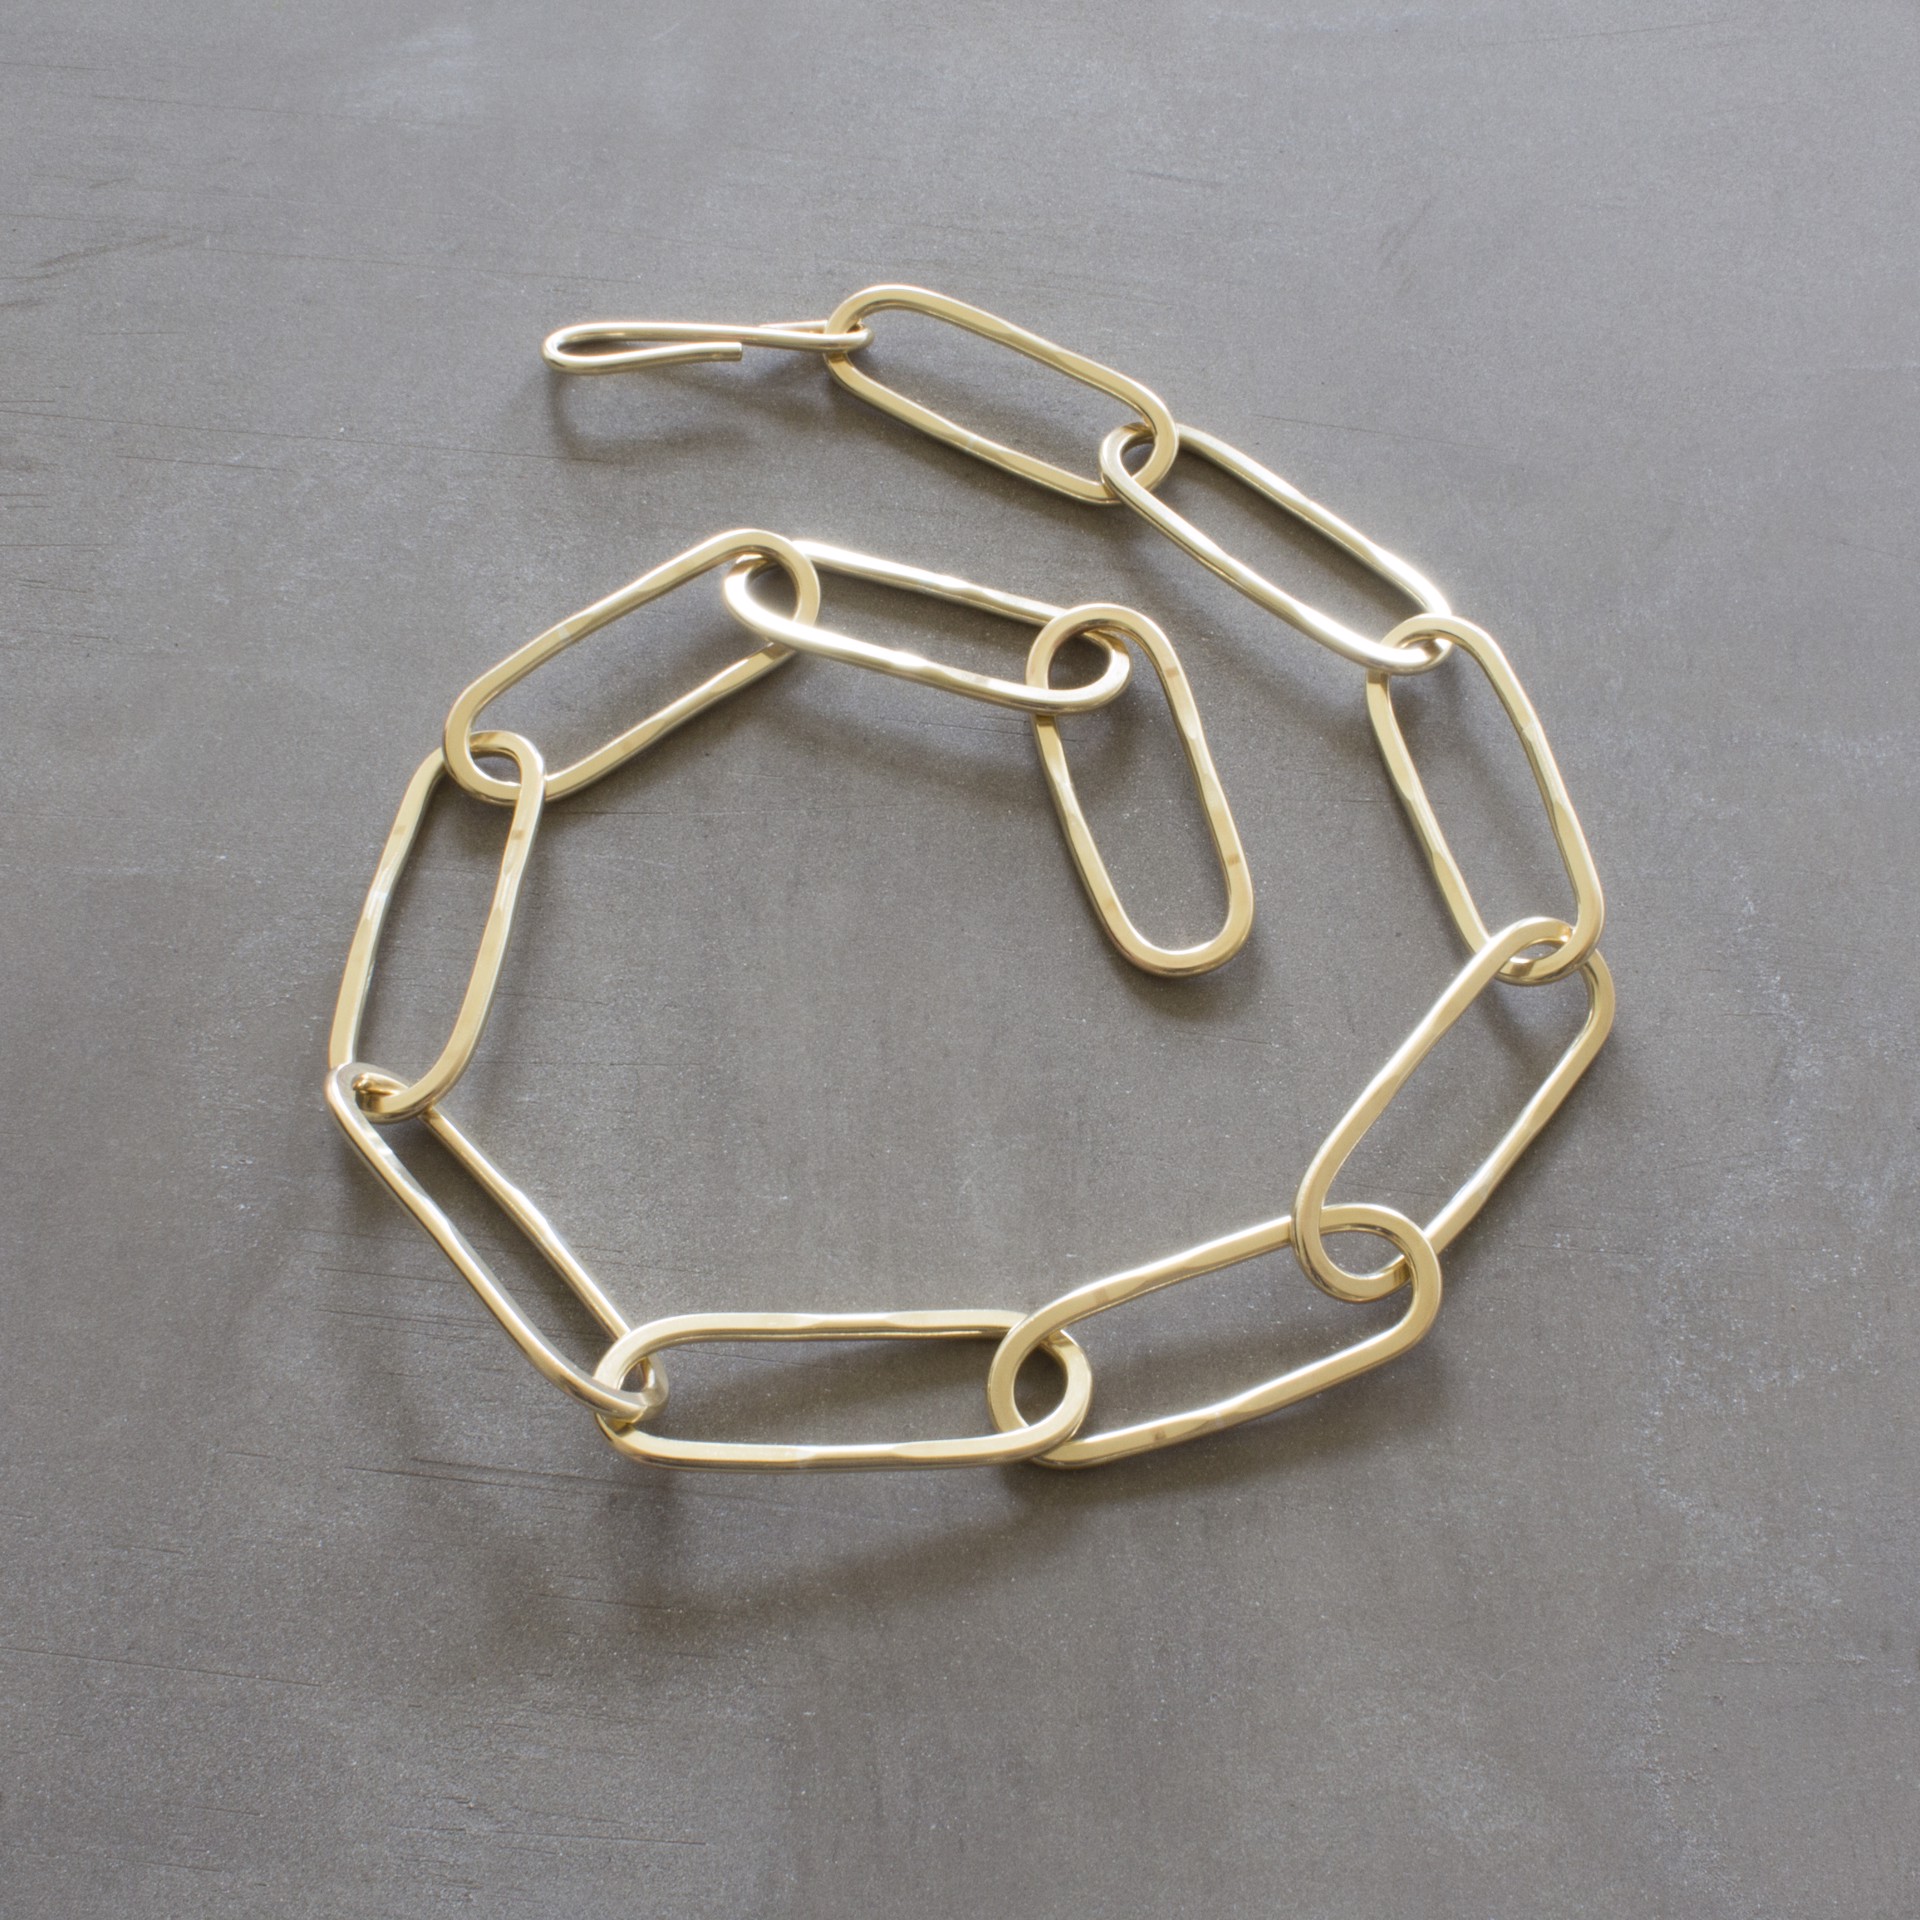 Chunky Chain - Brass by Audrey Laine